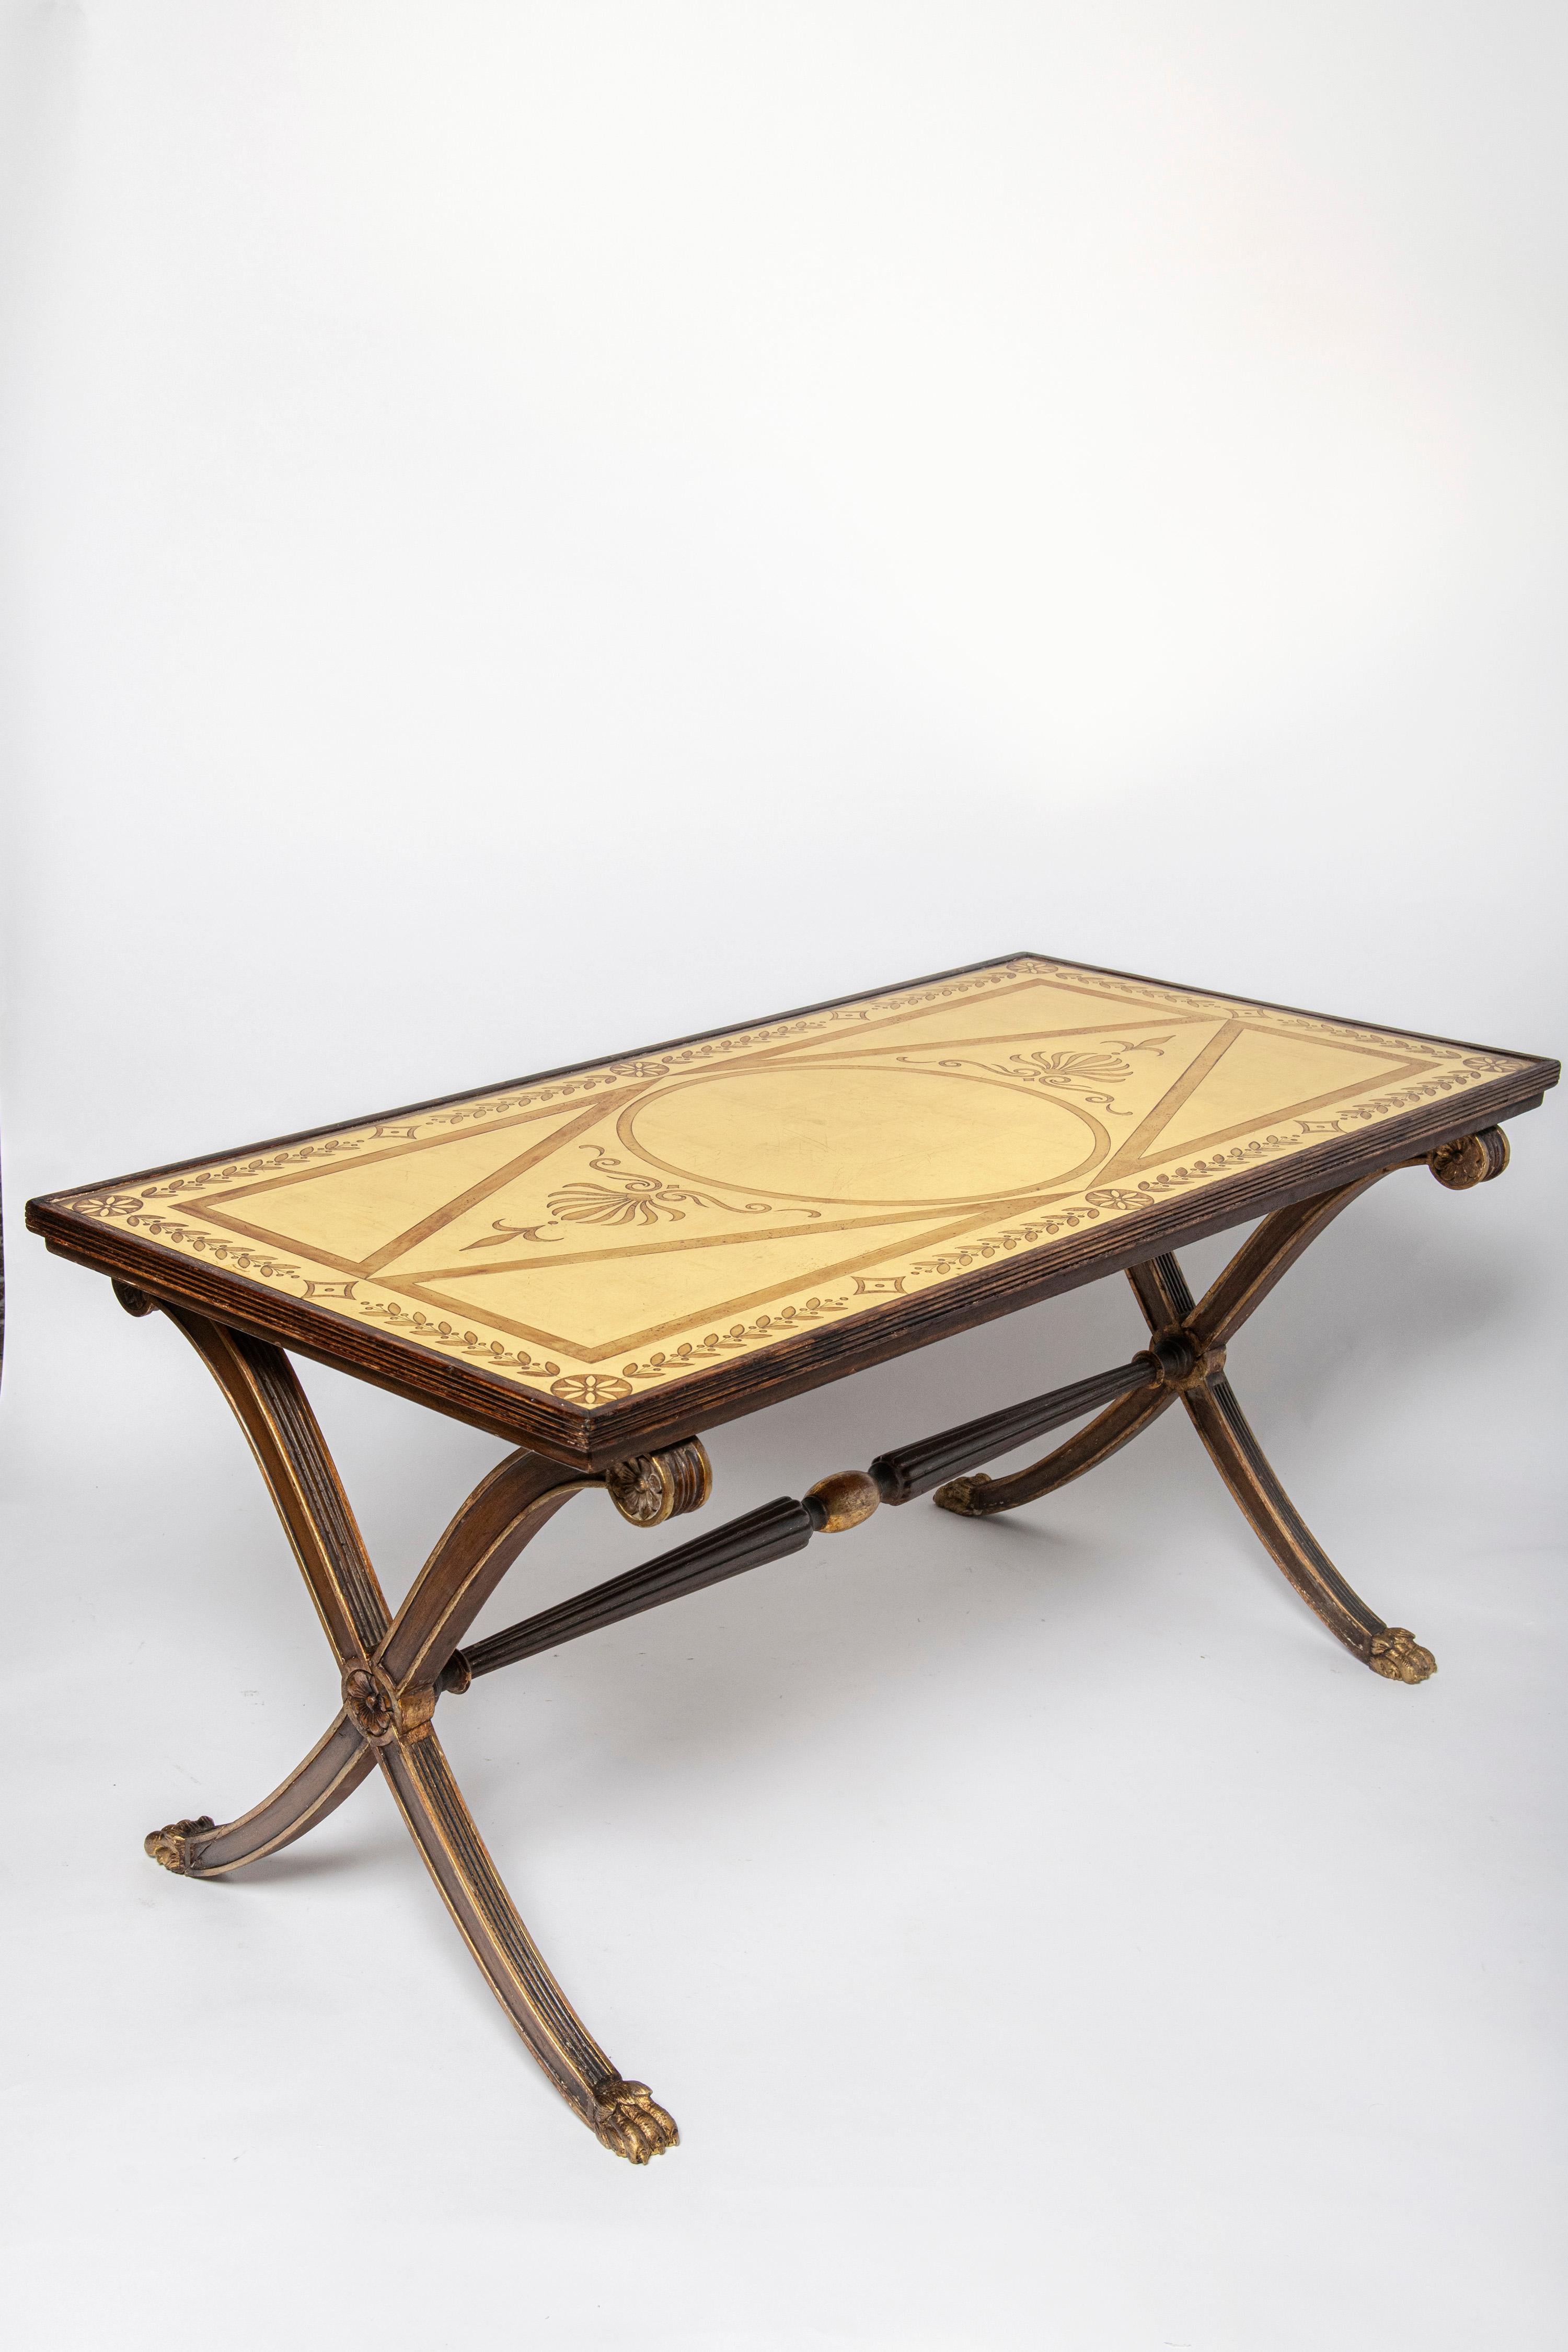 Patinated wood and acid etched glass low table attributed to Maison Jansen. France, circa 1950. 